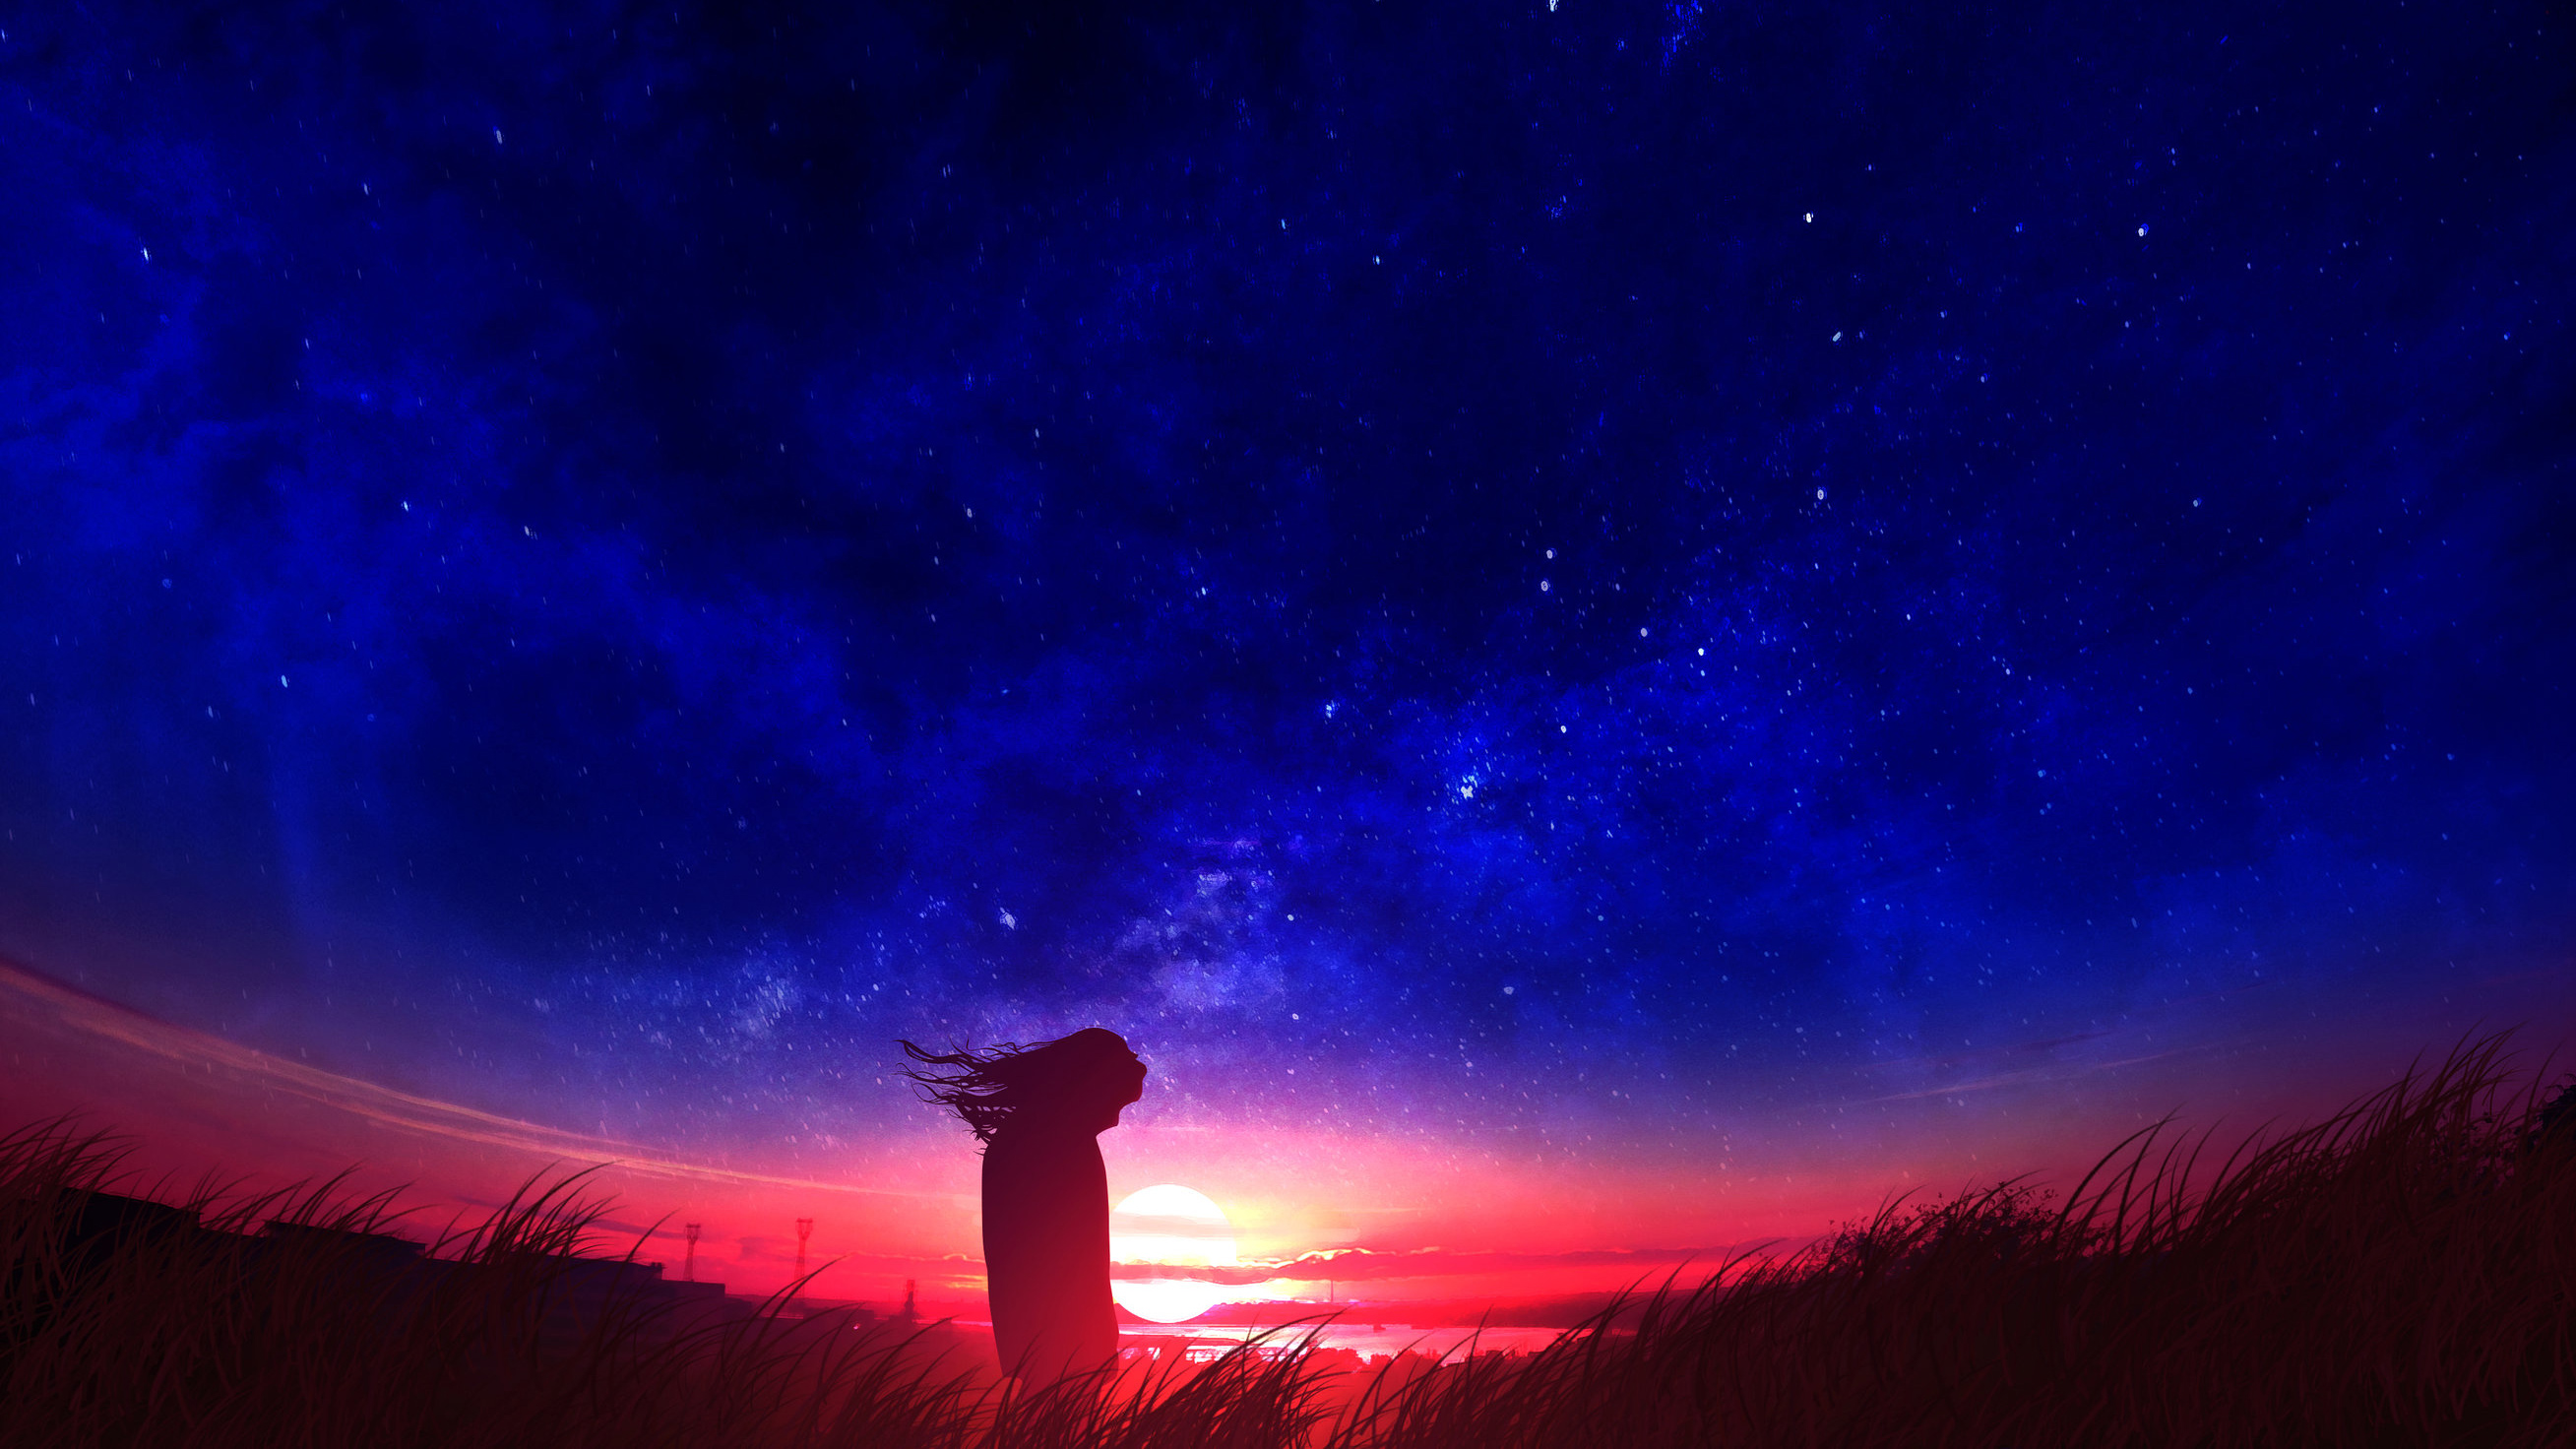 Anime Girl In Field Silhouette Sunset, HD Anime, 4k Wallpapers, Images